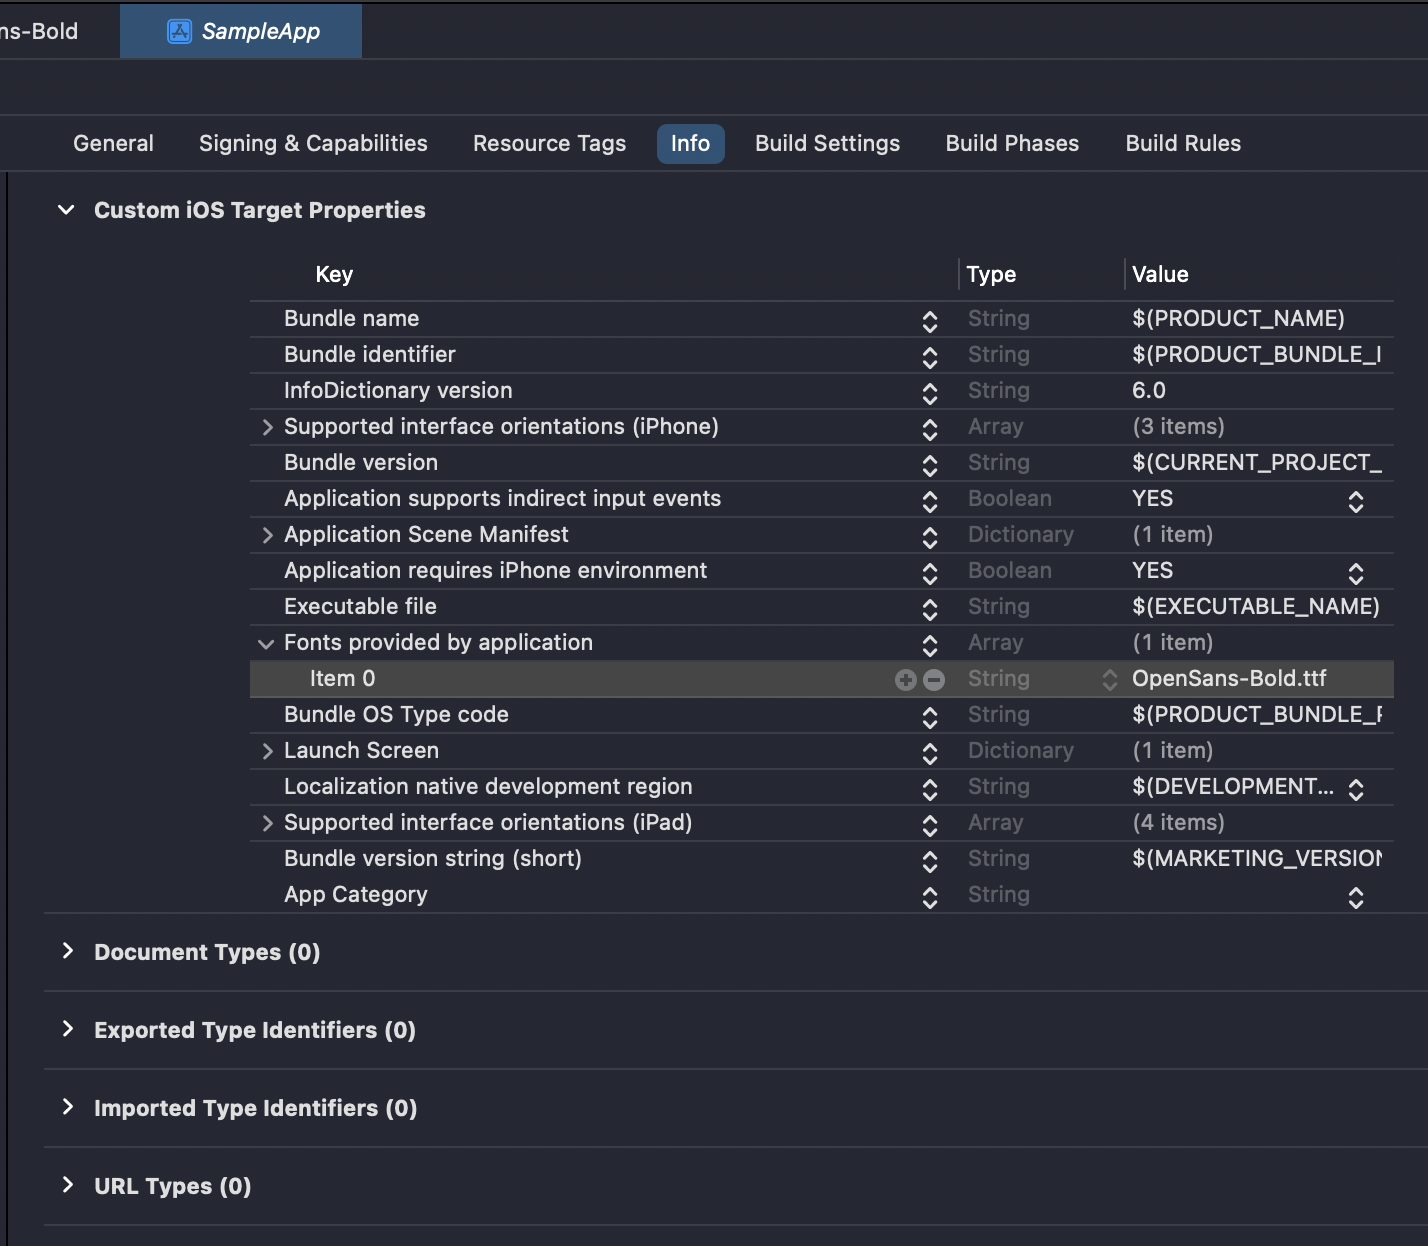 An image of Xcode on the bundle info screen showing fonts being added to the plist